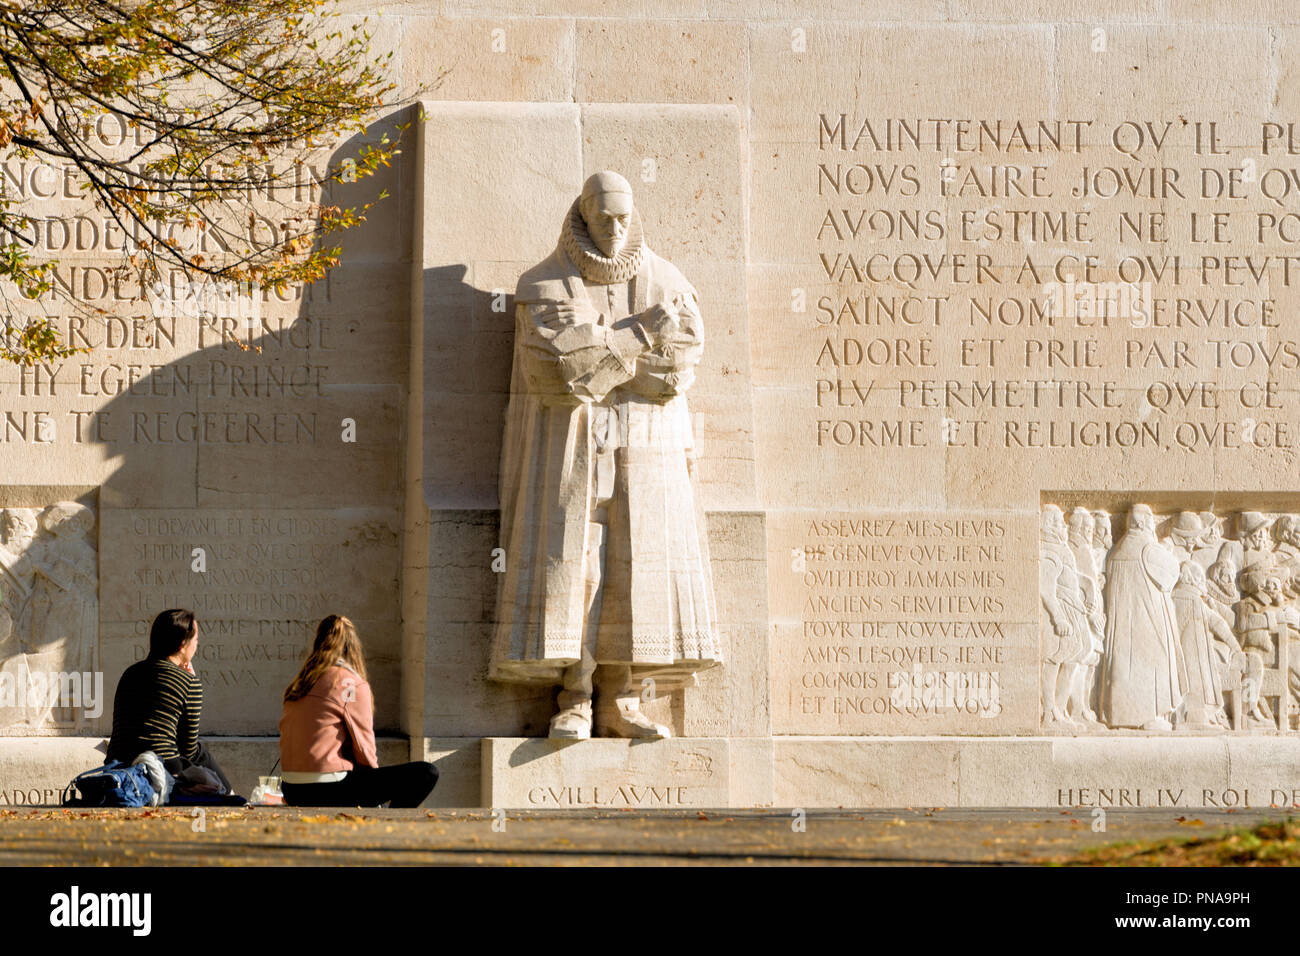 The Reformation Wall in bastions park in Geneva, Switzerland Stock Photo -  Alamy